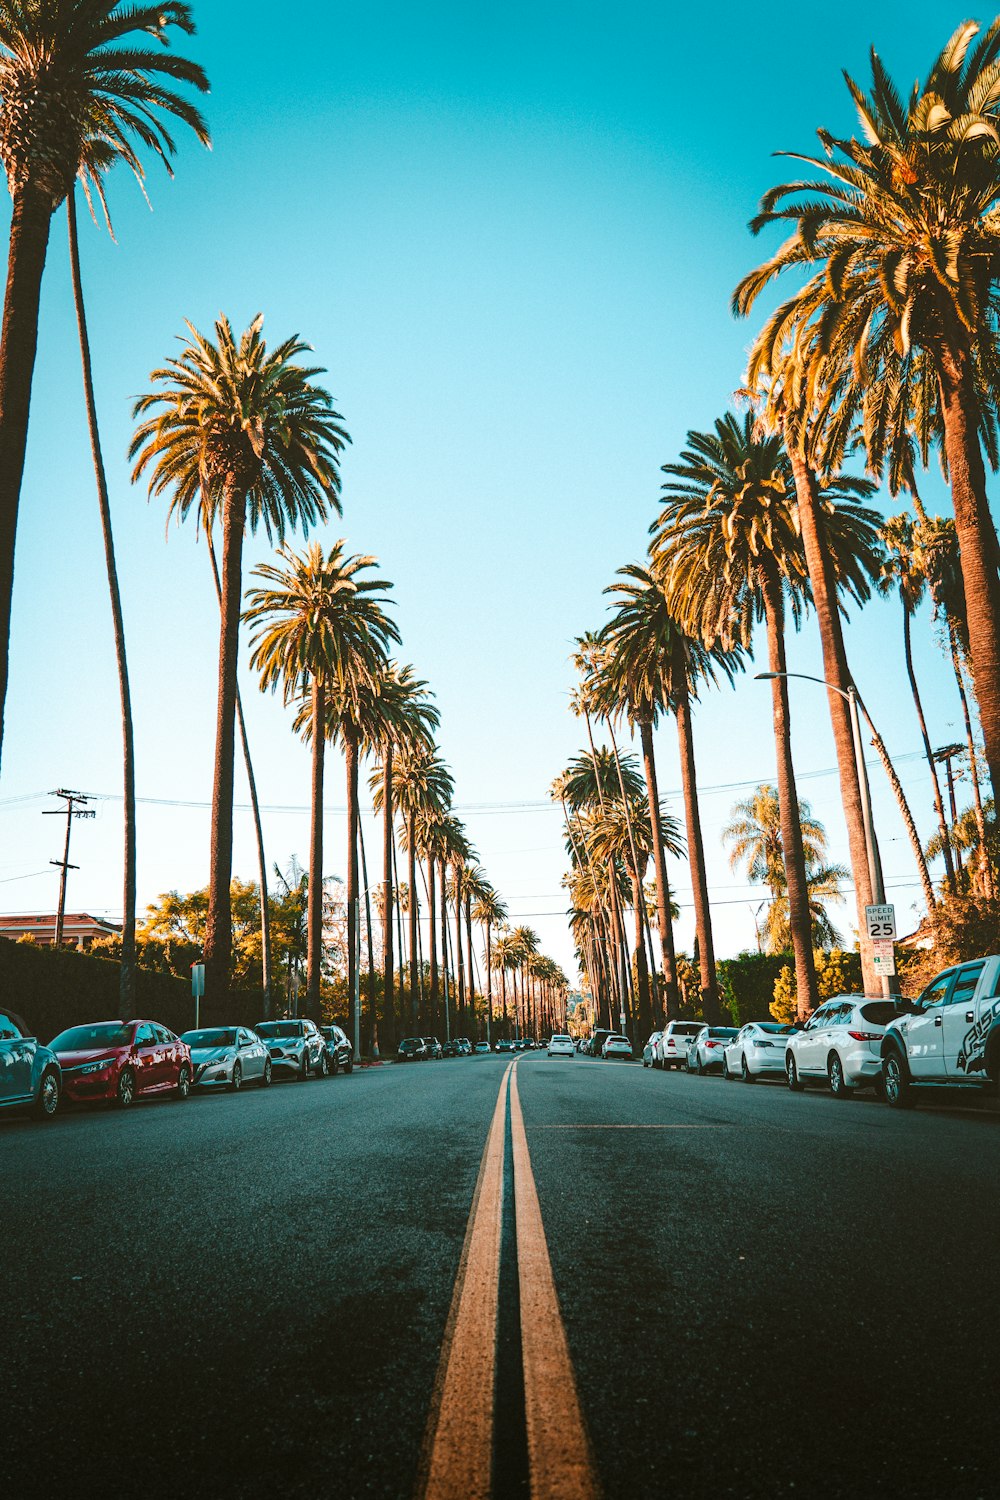 a street lined with palm trees and parked cars